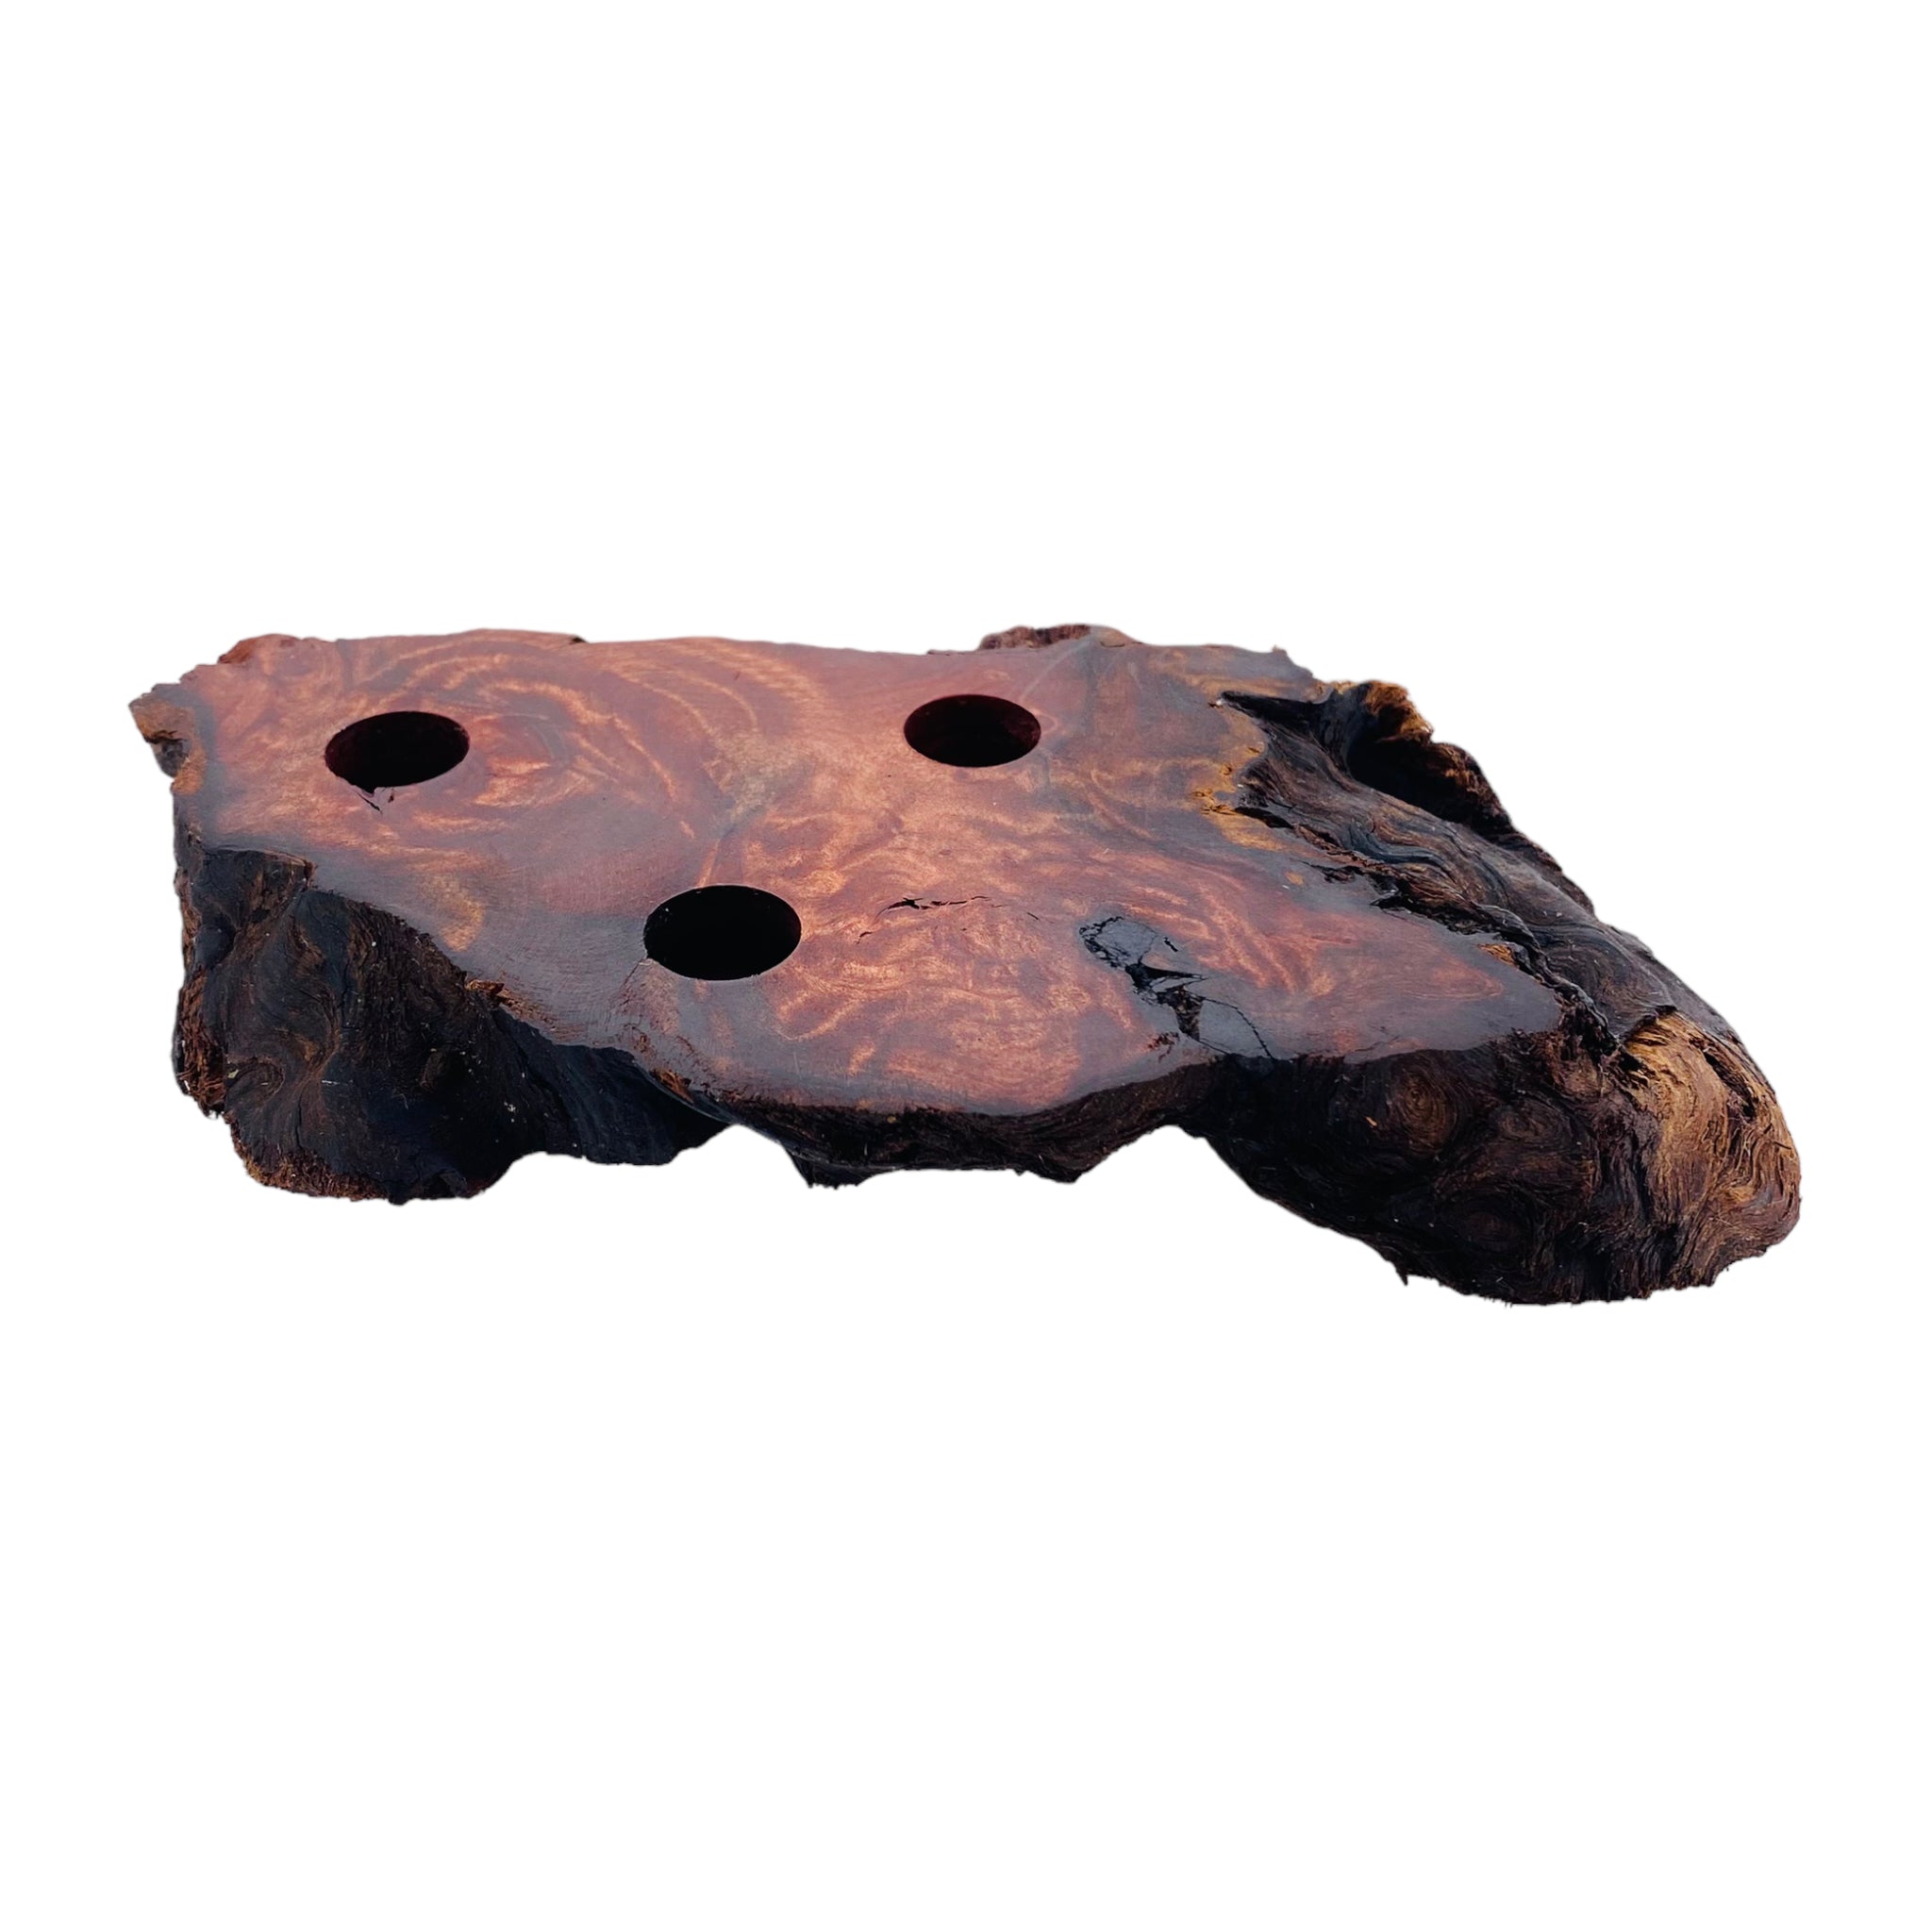 3 Hole Wood Display Stand Holder For 14mm Bong Bowl Pieces Or Quartz Bangers - Red Wood Burl With Live Edge